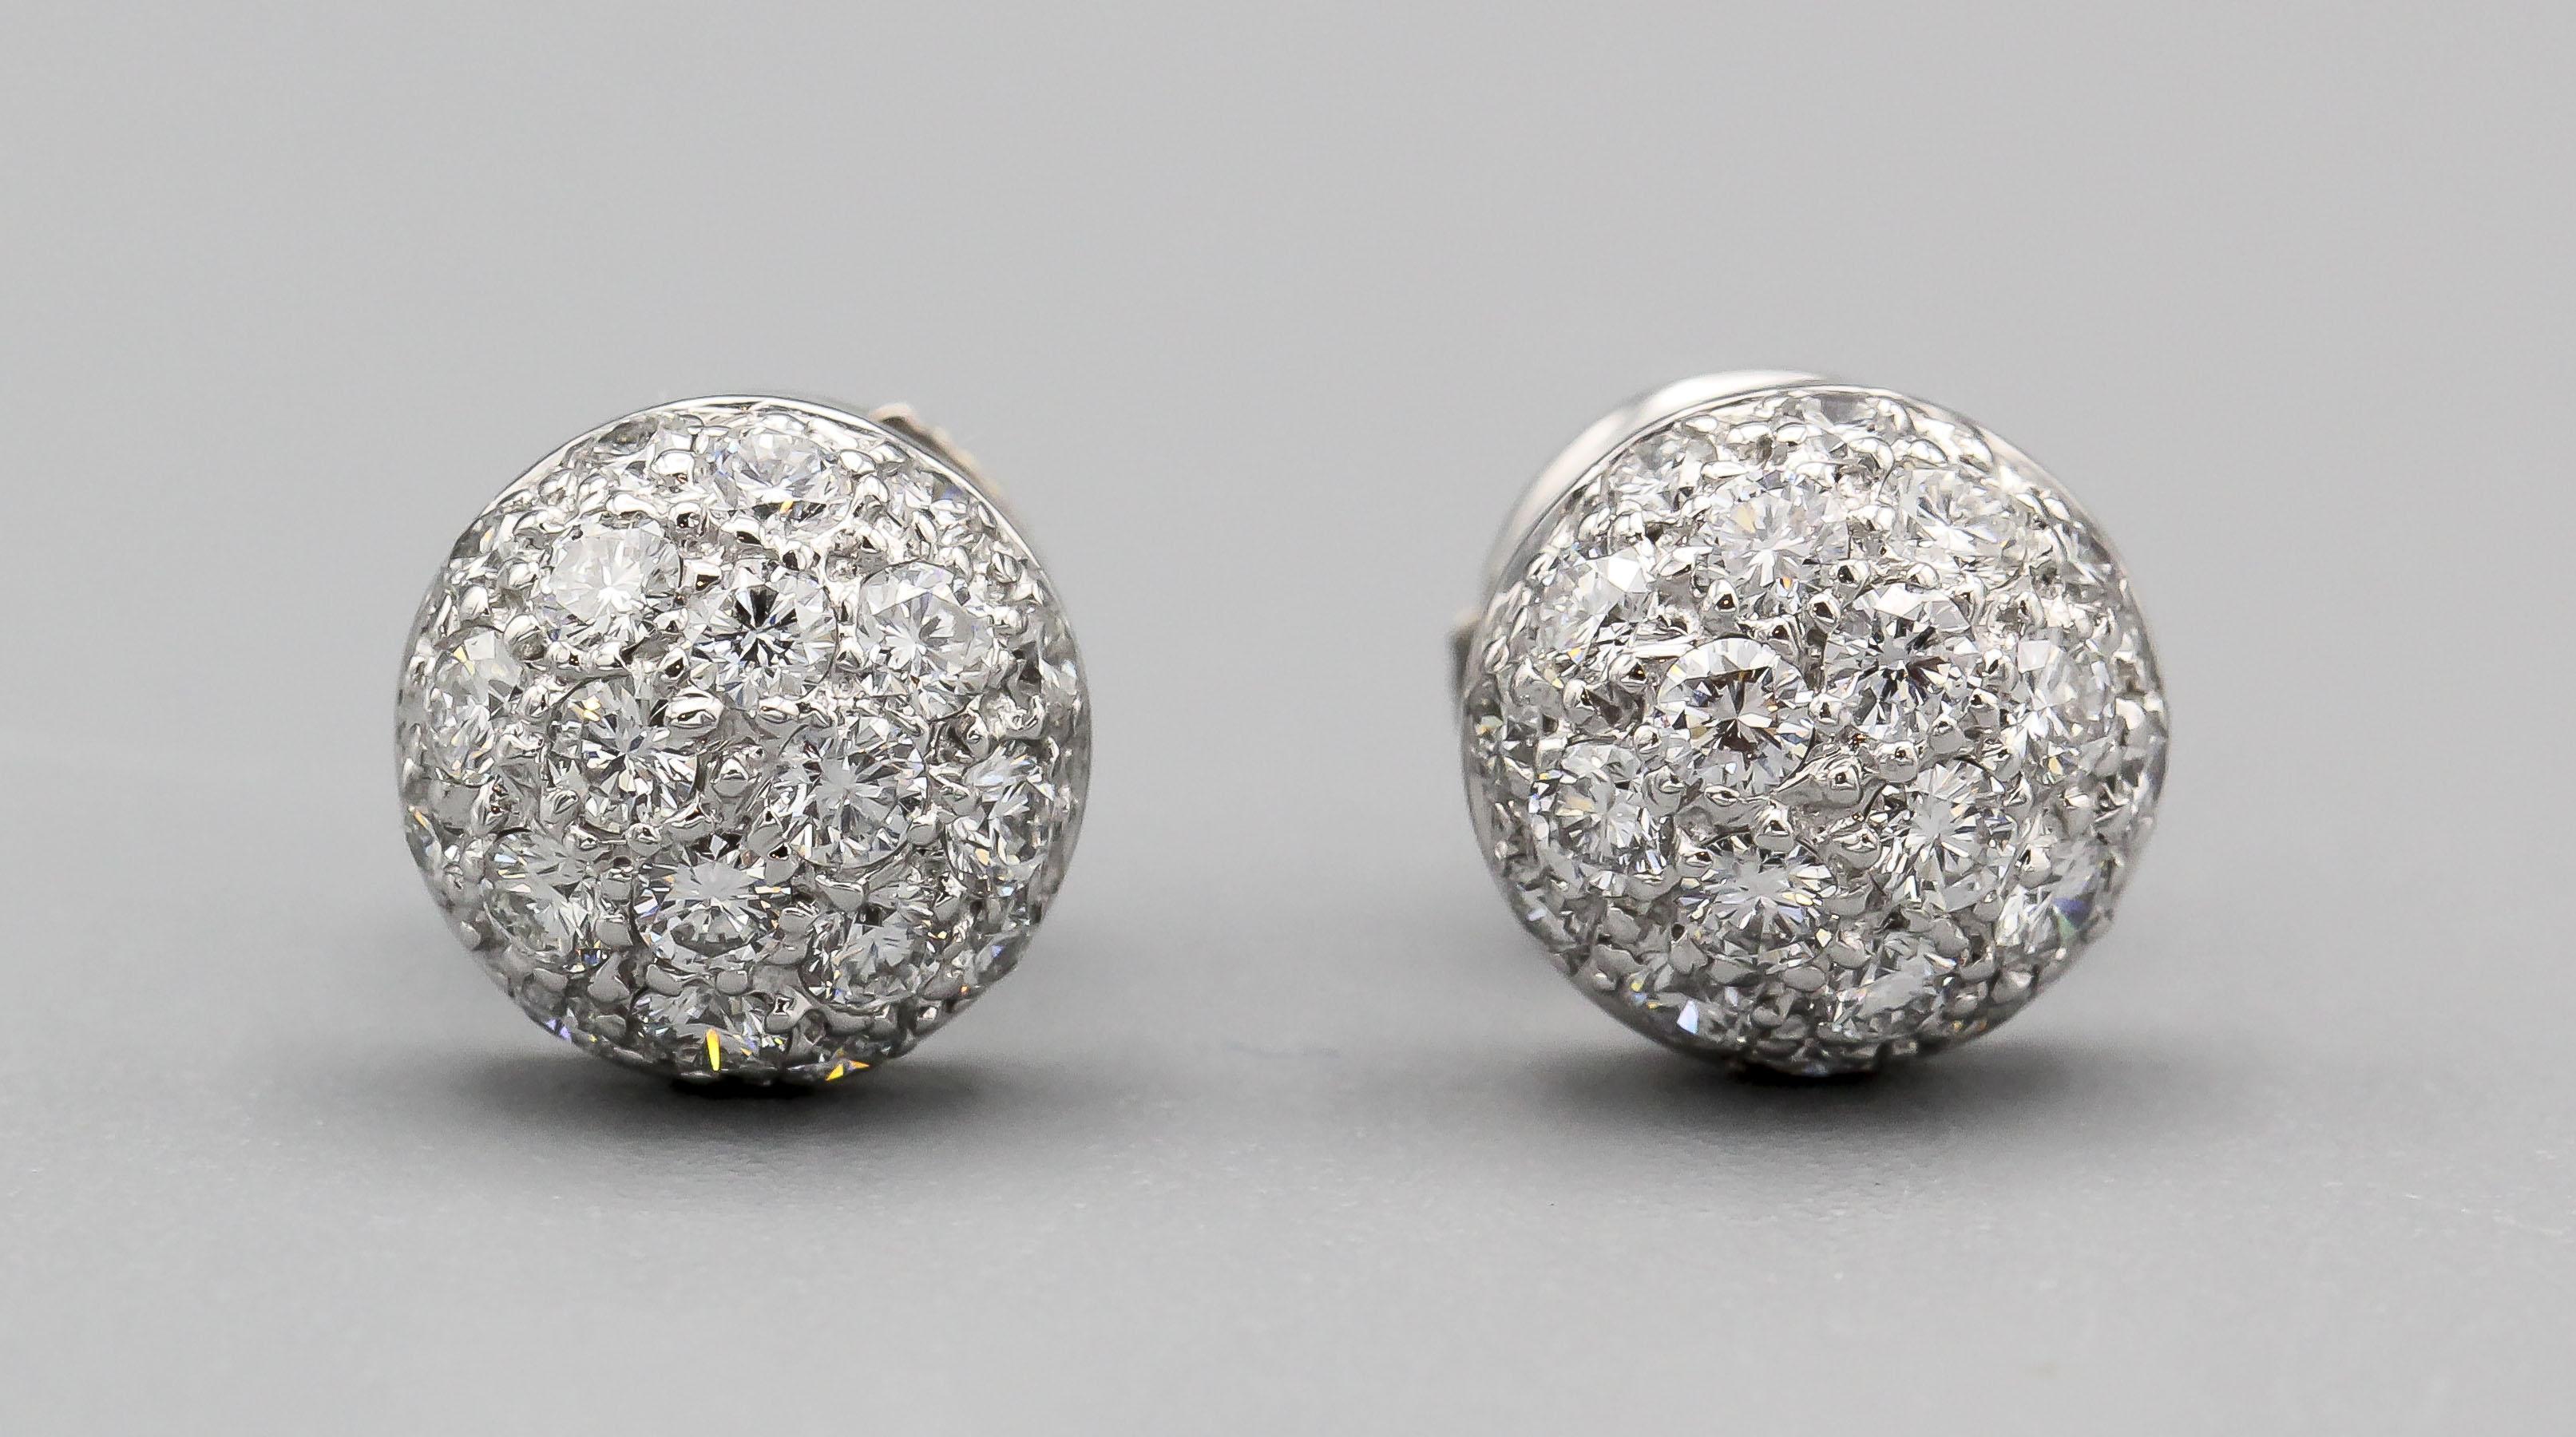 Introducing the Cartier Pavé Diamond 18 Karat White Gold Dome Earrings Studs—an exquisite expression of elegance and luxury that encapsulates Cartier's legacy of sophistication and exceptional craftsmanship. These earrings are a true testament to